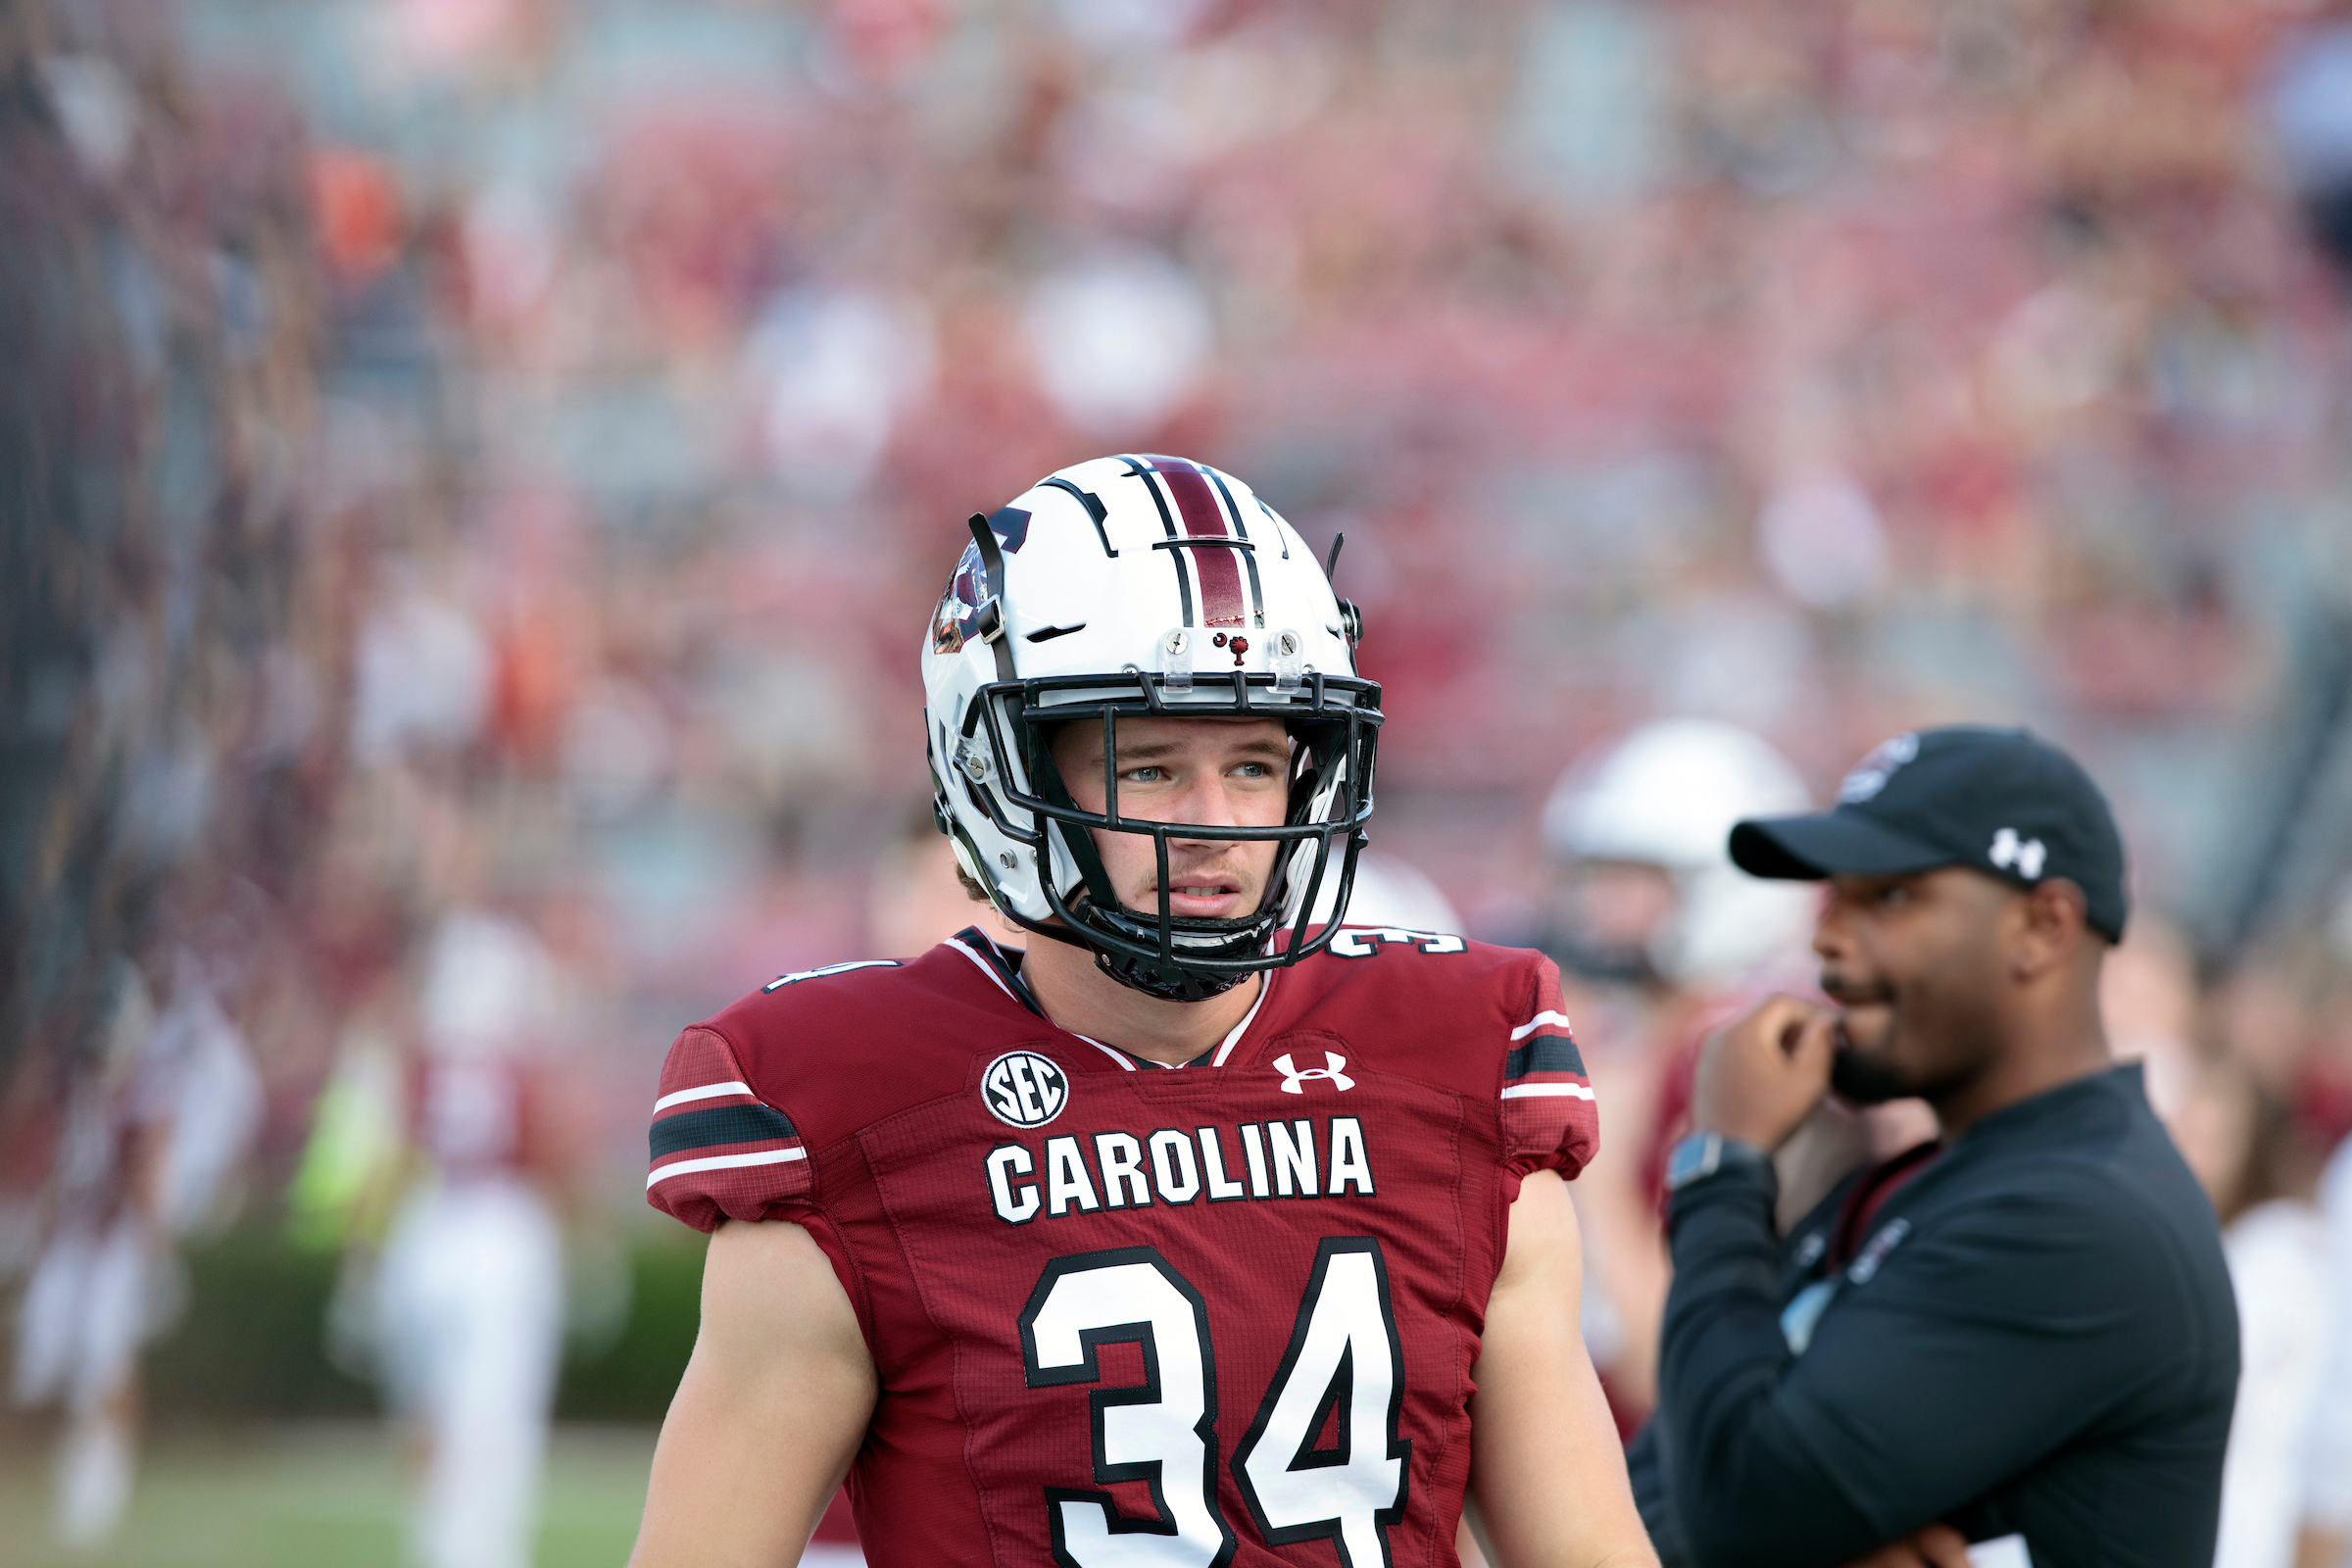 “Matt has been our most consistent and the most accurate long snapper, and we chart every single snap with every one of our guys every day,” says Pete Lembo, the special teams coordinator at South Carolina.
